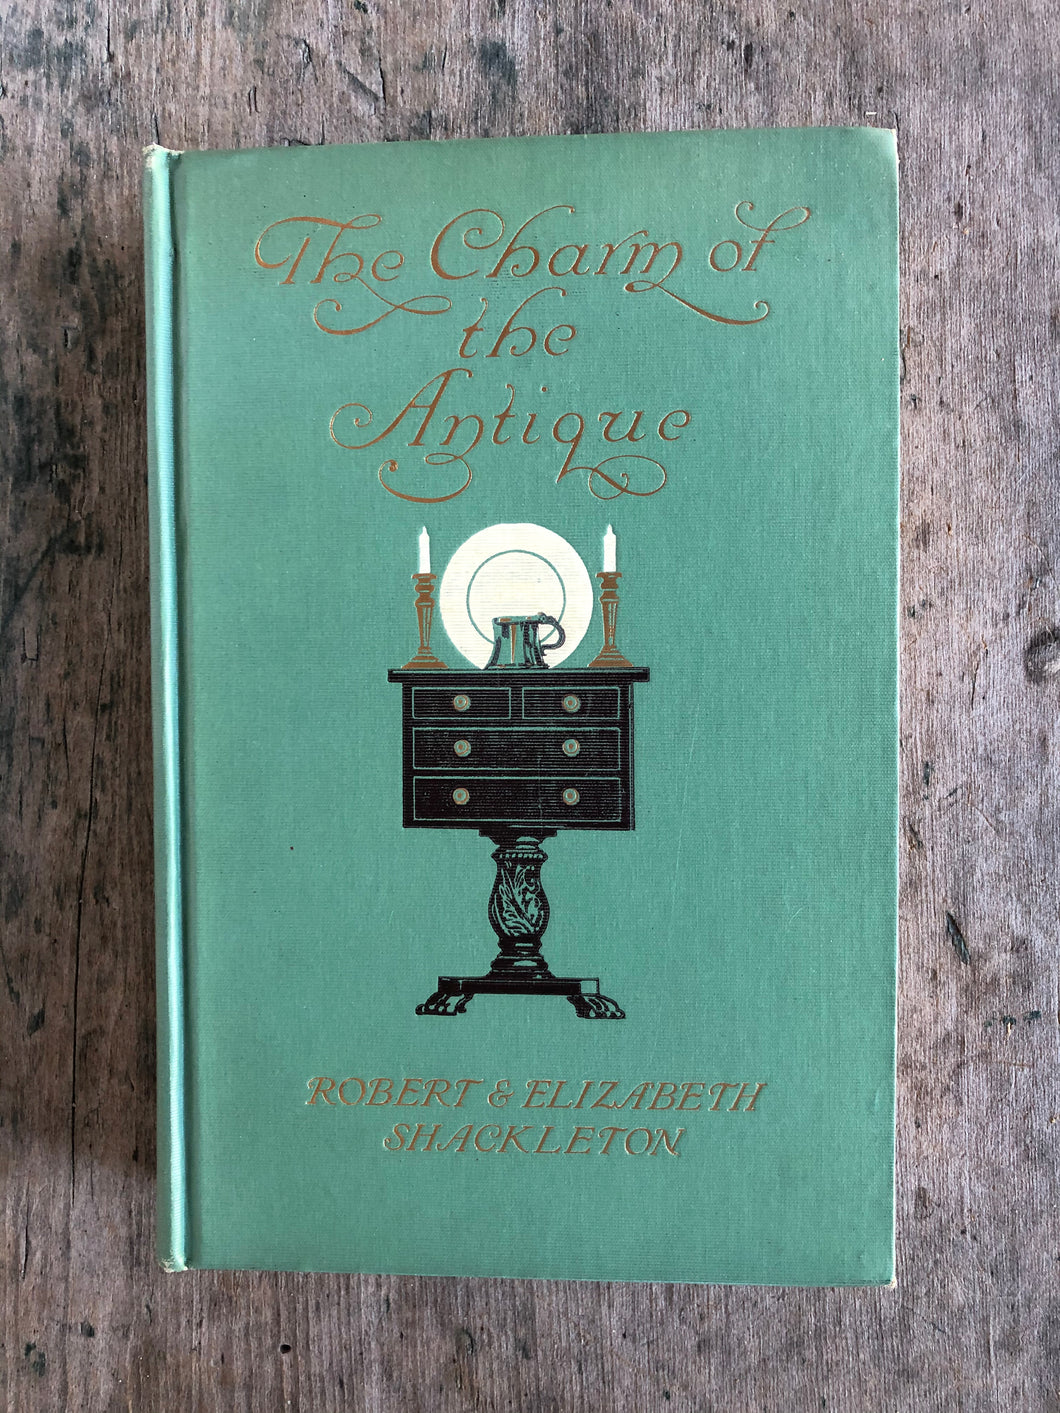 The Charm of the Antique by Robert and Elizabeth Shackleton